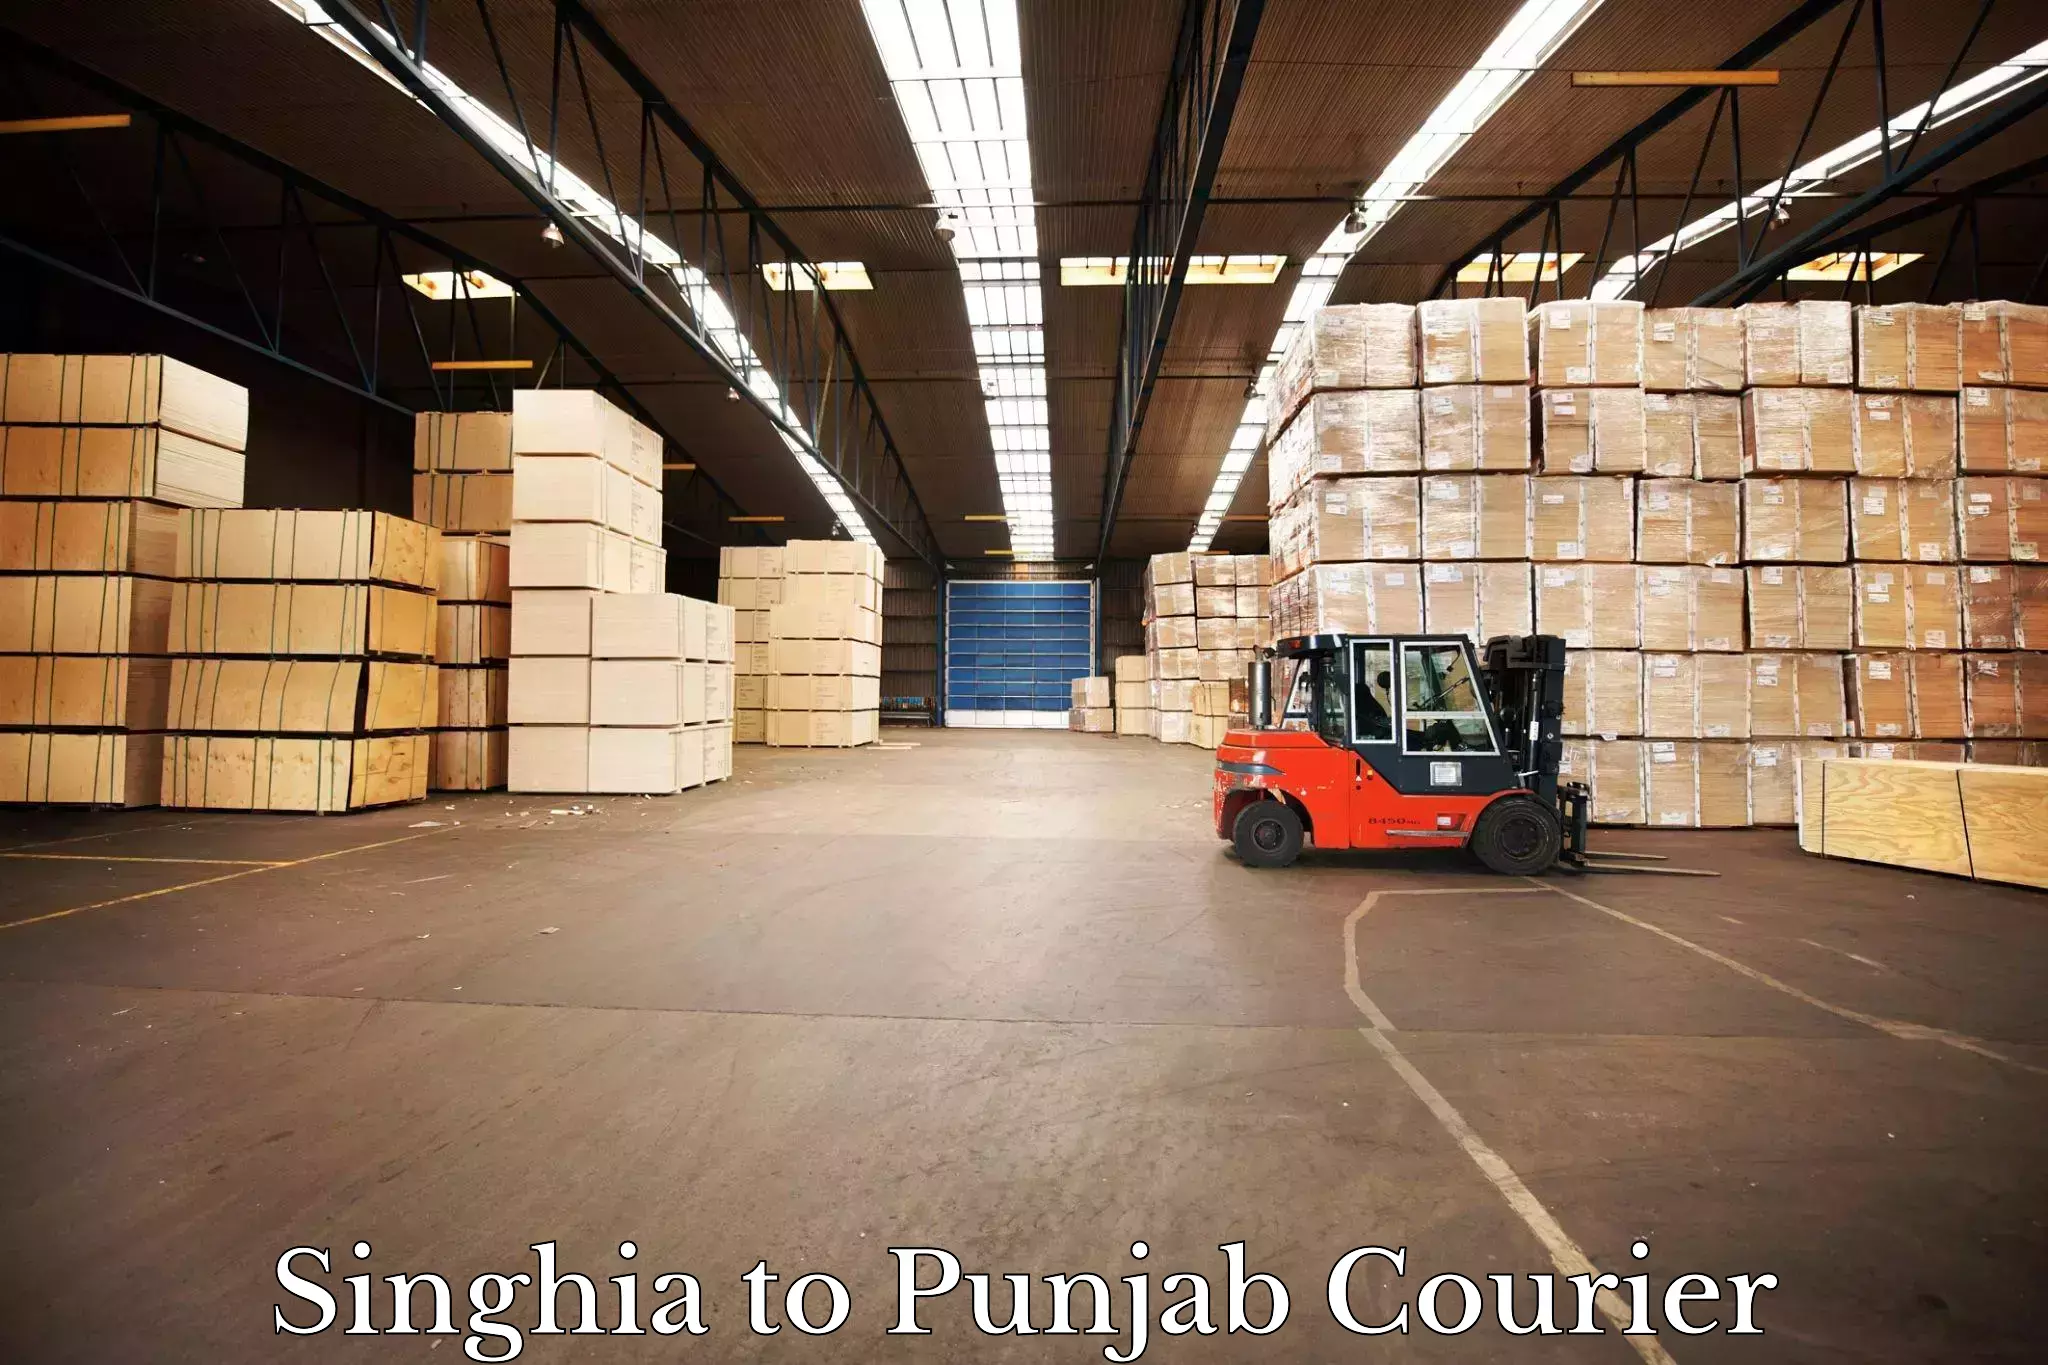 Rural area delivery in Singhia to Punjab